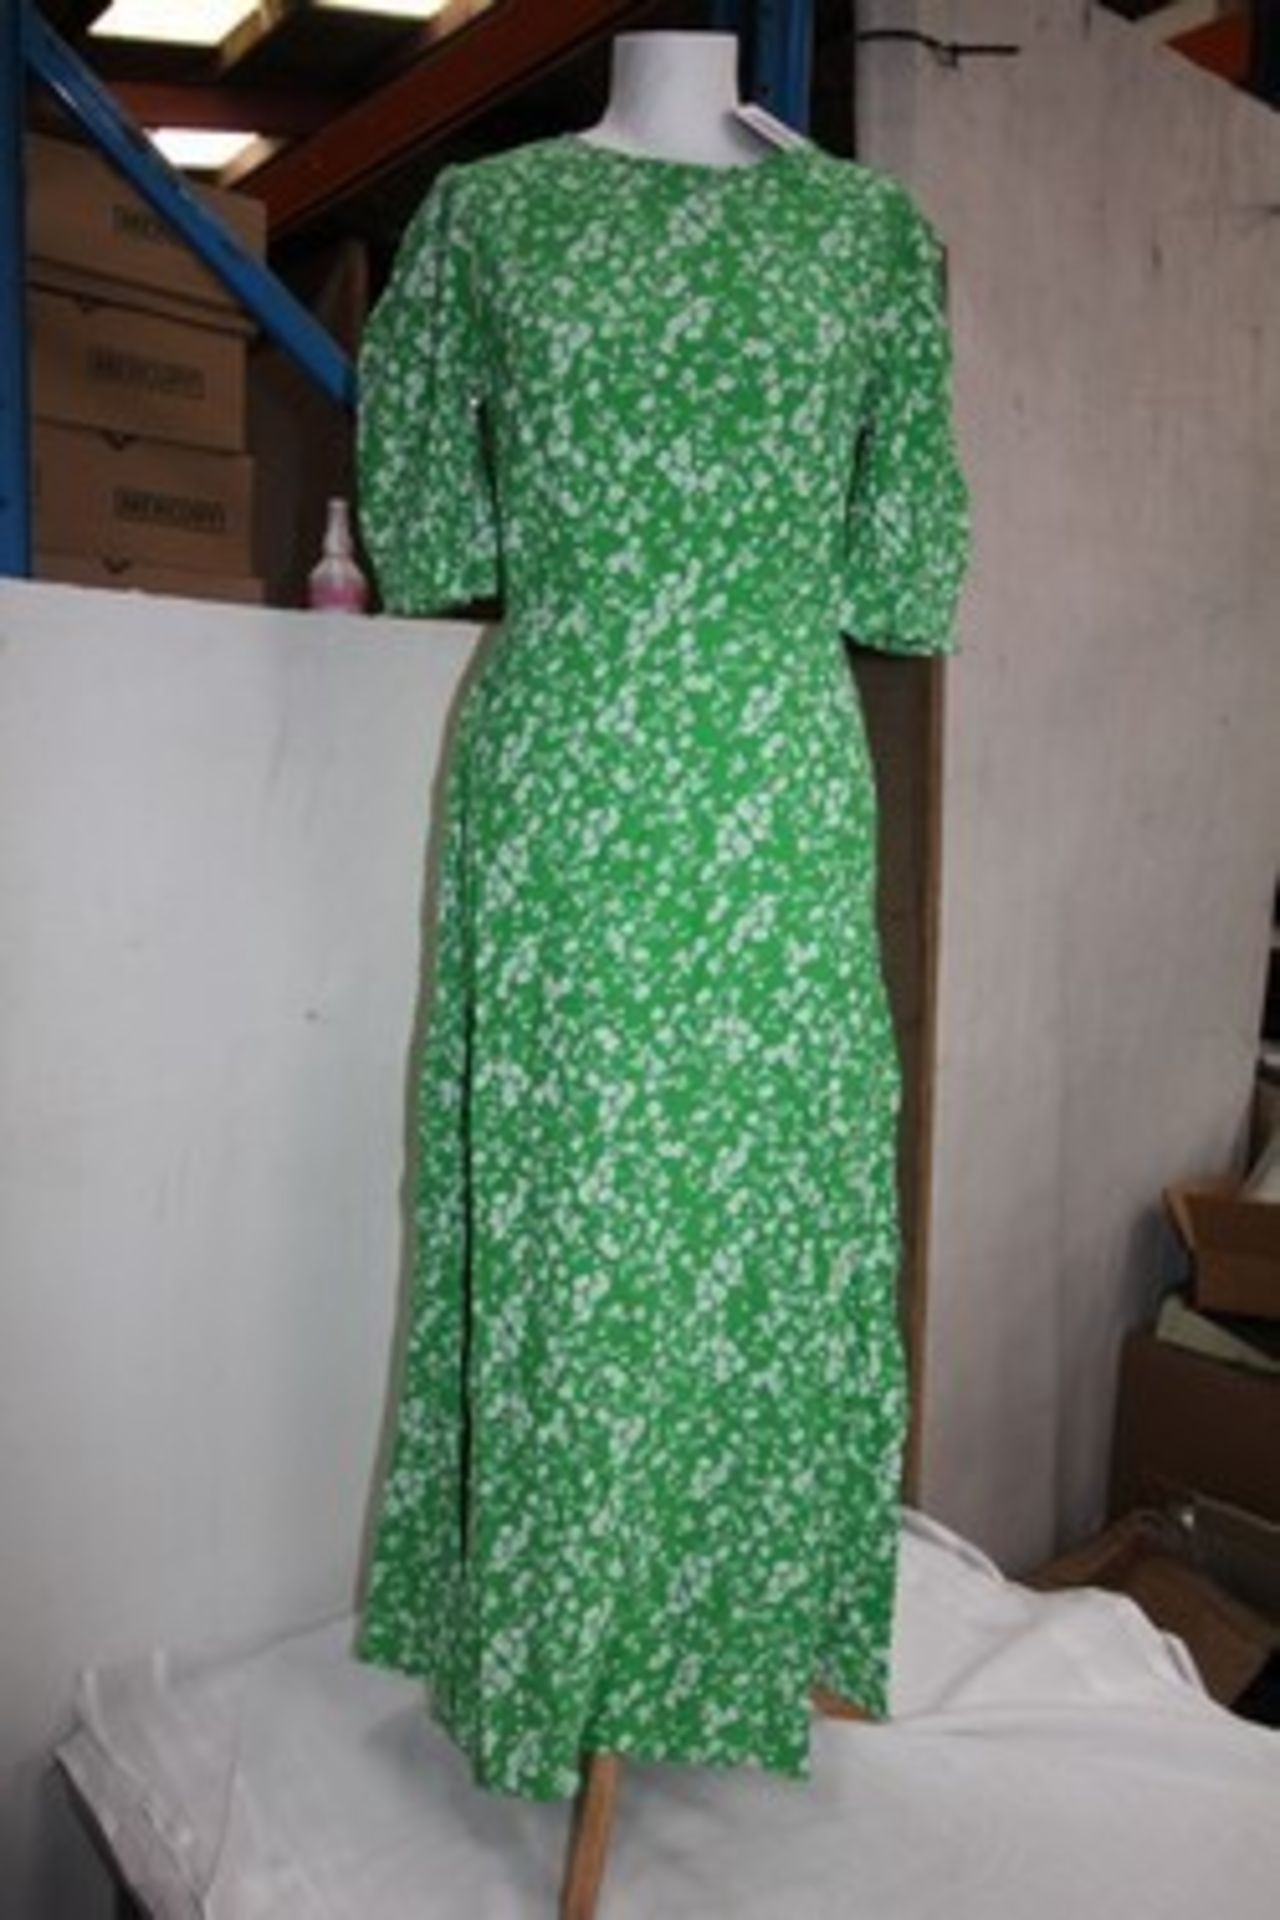 3 x Great Plains Fresh Ditsy fresh green 3/4 length dresses, 2 x size 8 and 1 x size 10 - New in